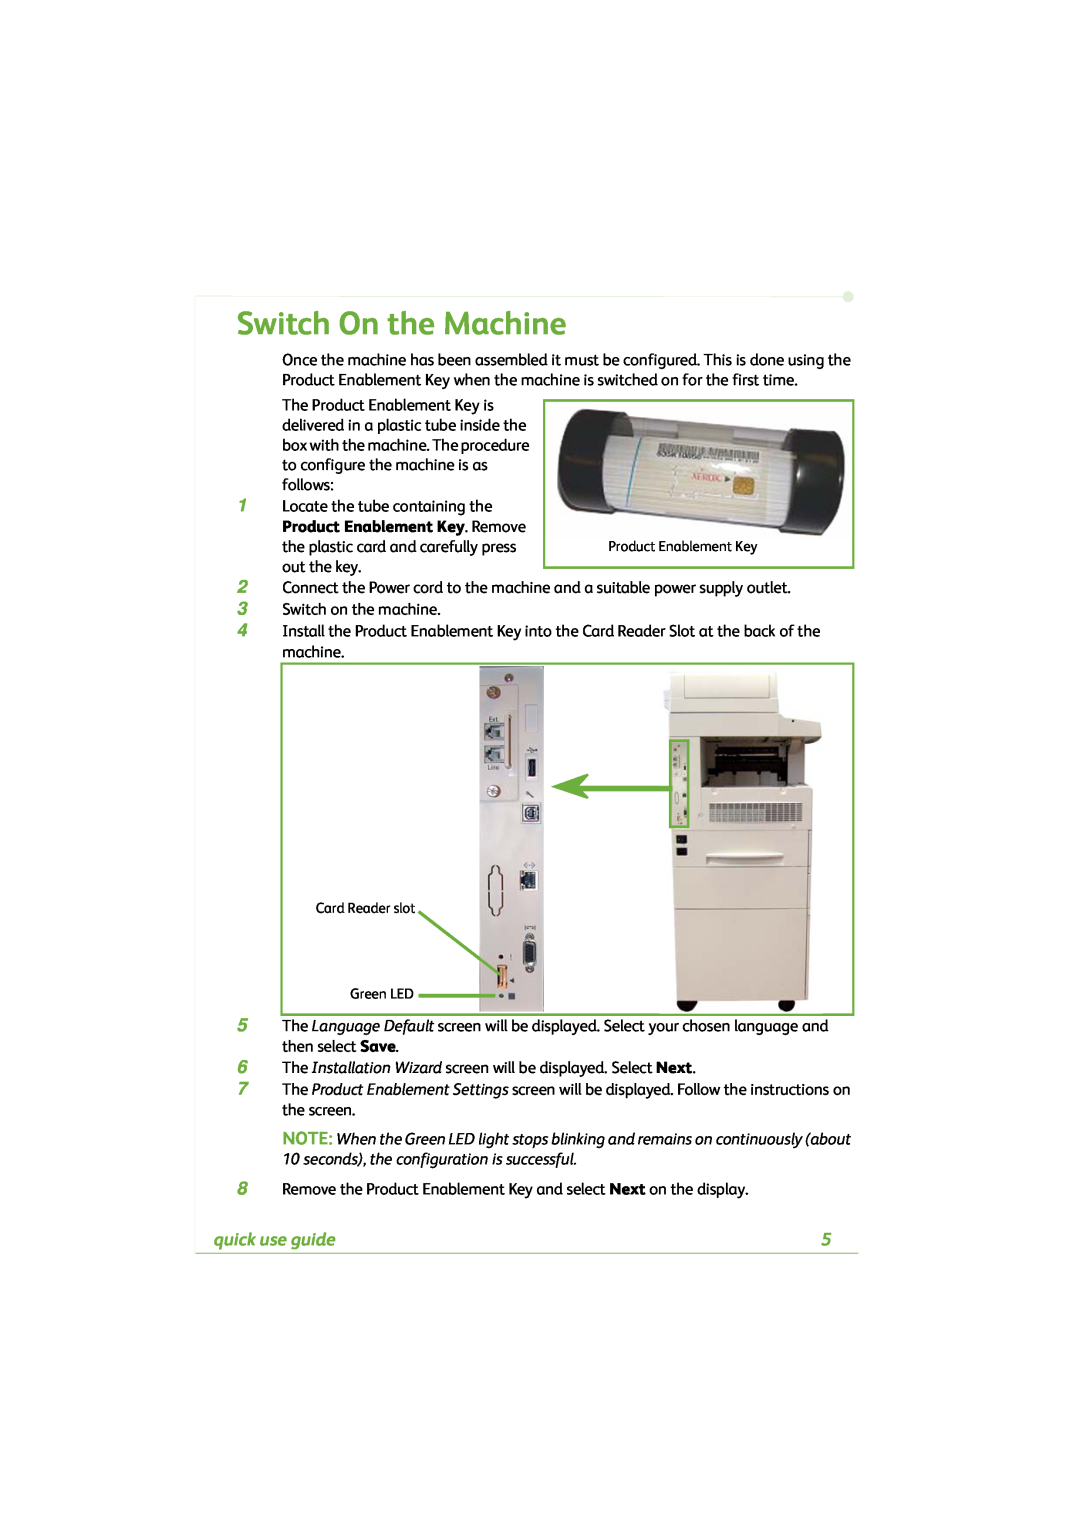 Xerox 4260C manual Switch On the Machine, 5 6 7 8, quick use guide 